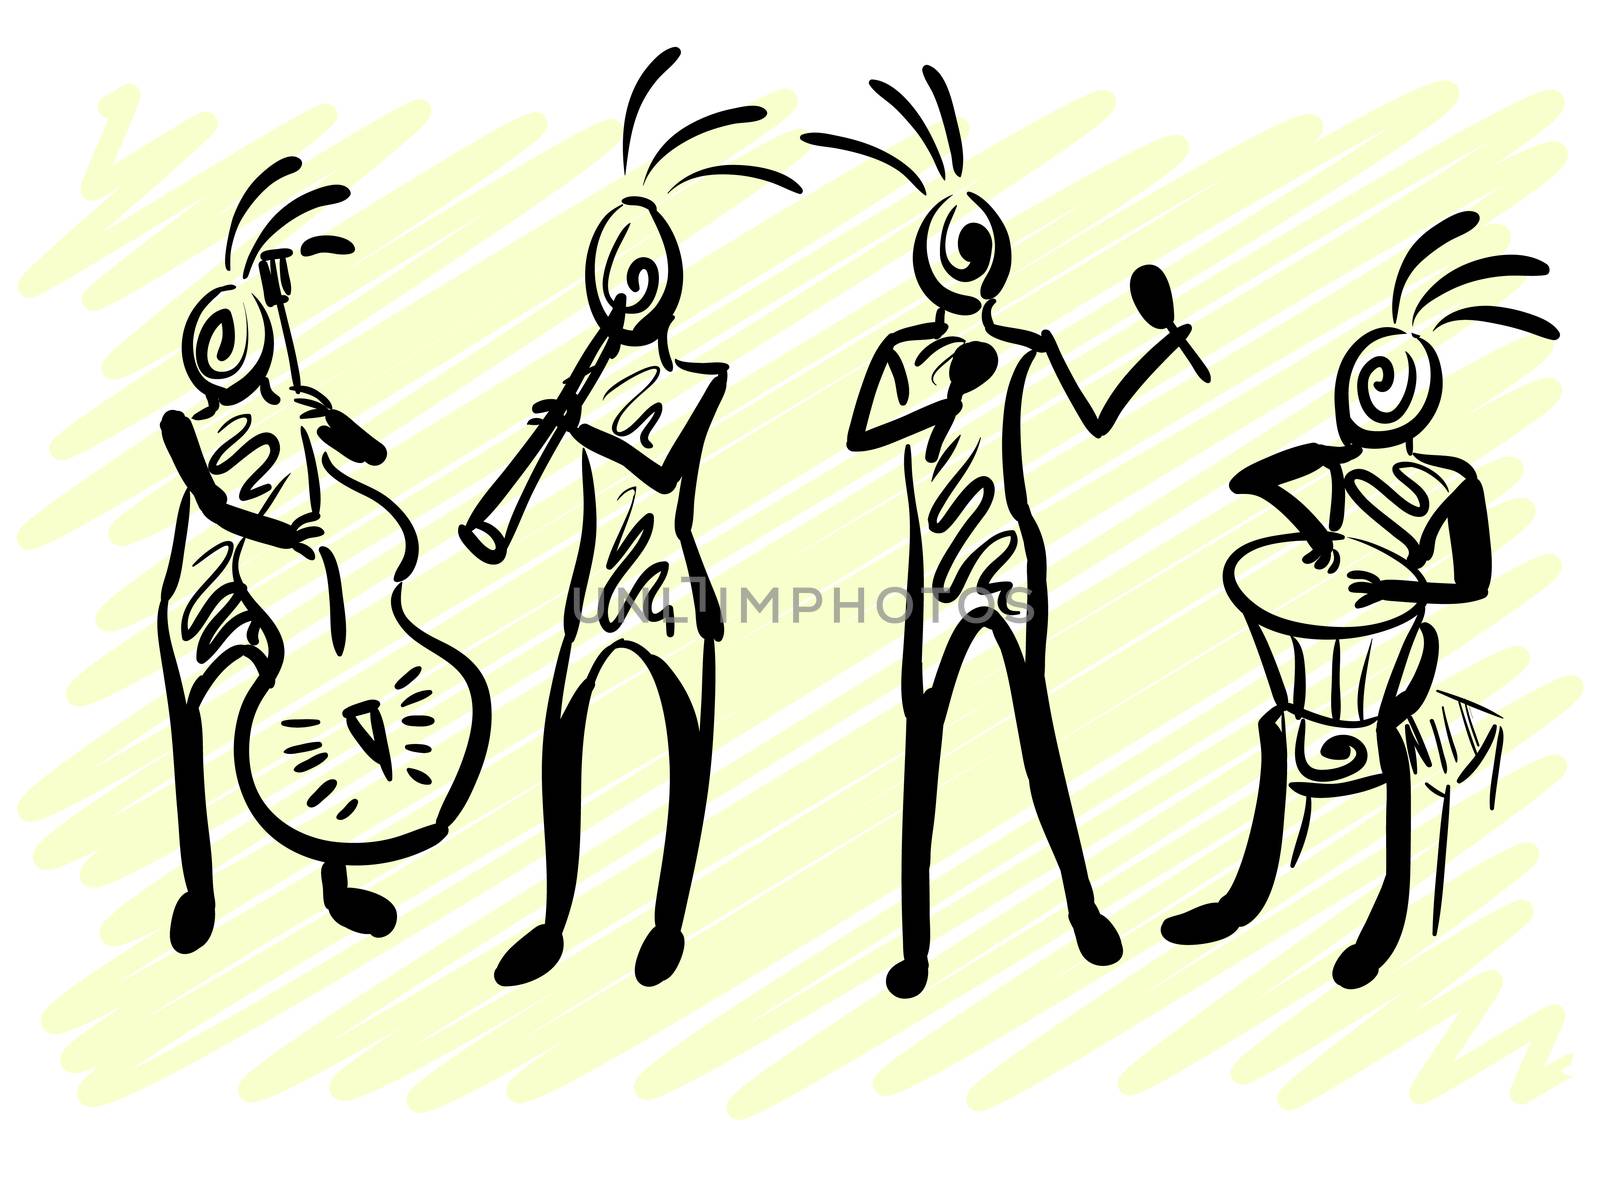 Abstract mysterious musicians. Corporate identity sketch. illustration